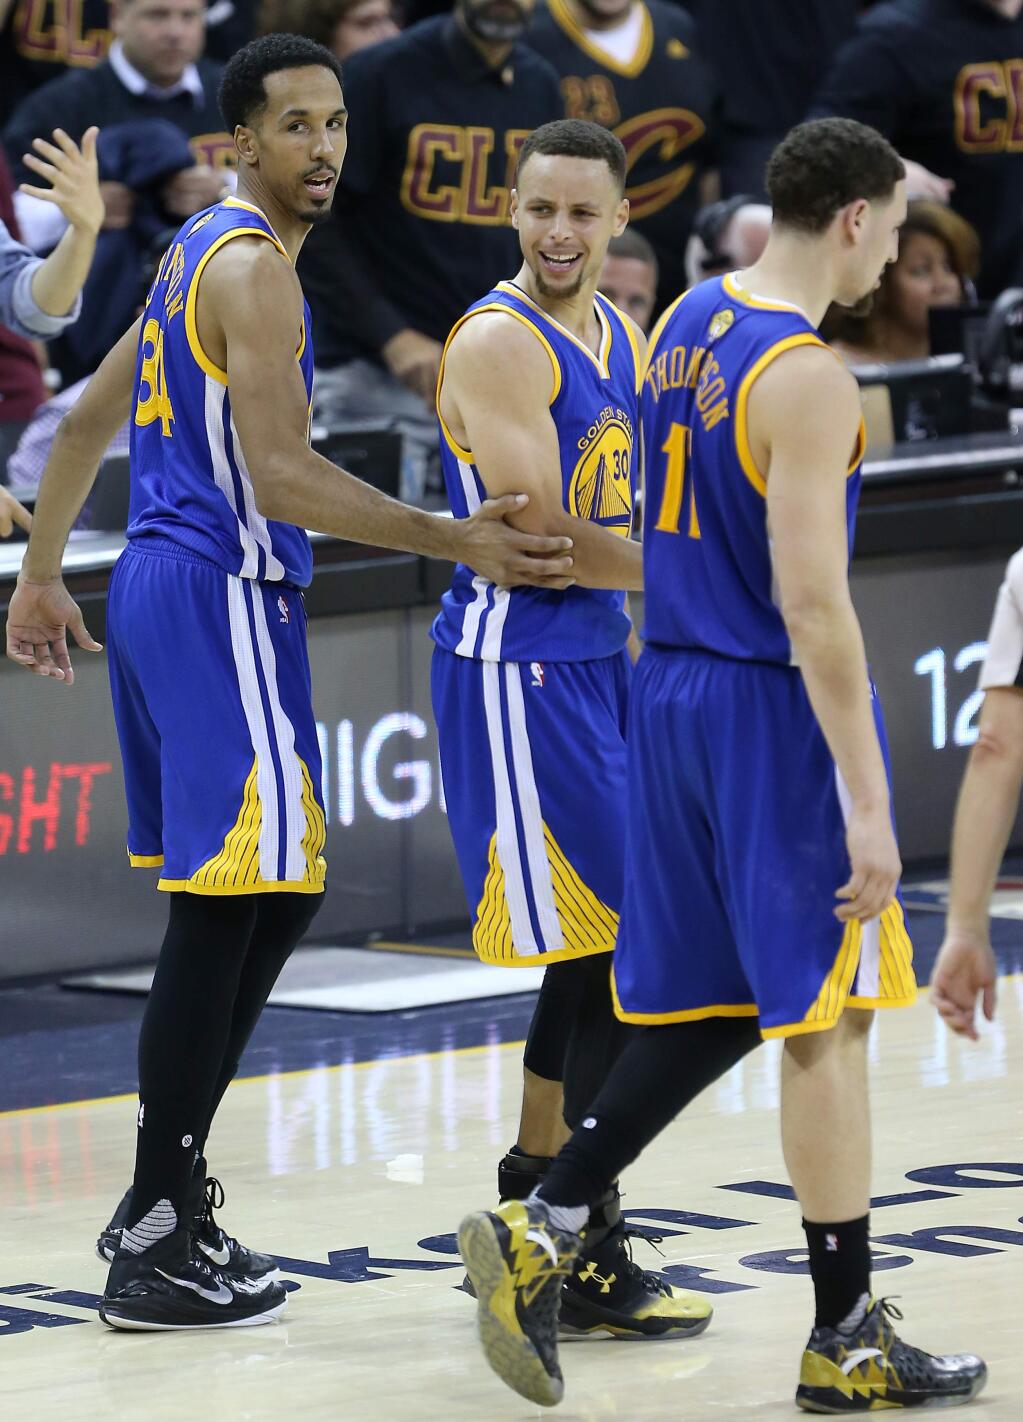 Golden State Warriors' Stephen Curry argues with a referee as he's walked off the court by teammates Shaun Livingston and Klay Thompson, after fouling out, during their game in Cleveland on Thursday, June 16, 2016. The Warriors lost to the Cavaliers 115-101. (Christopher Chung / The Press Democrat)